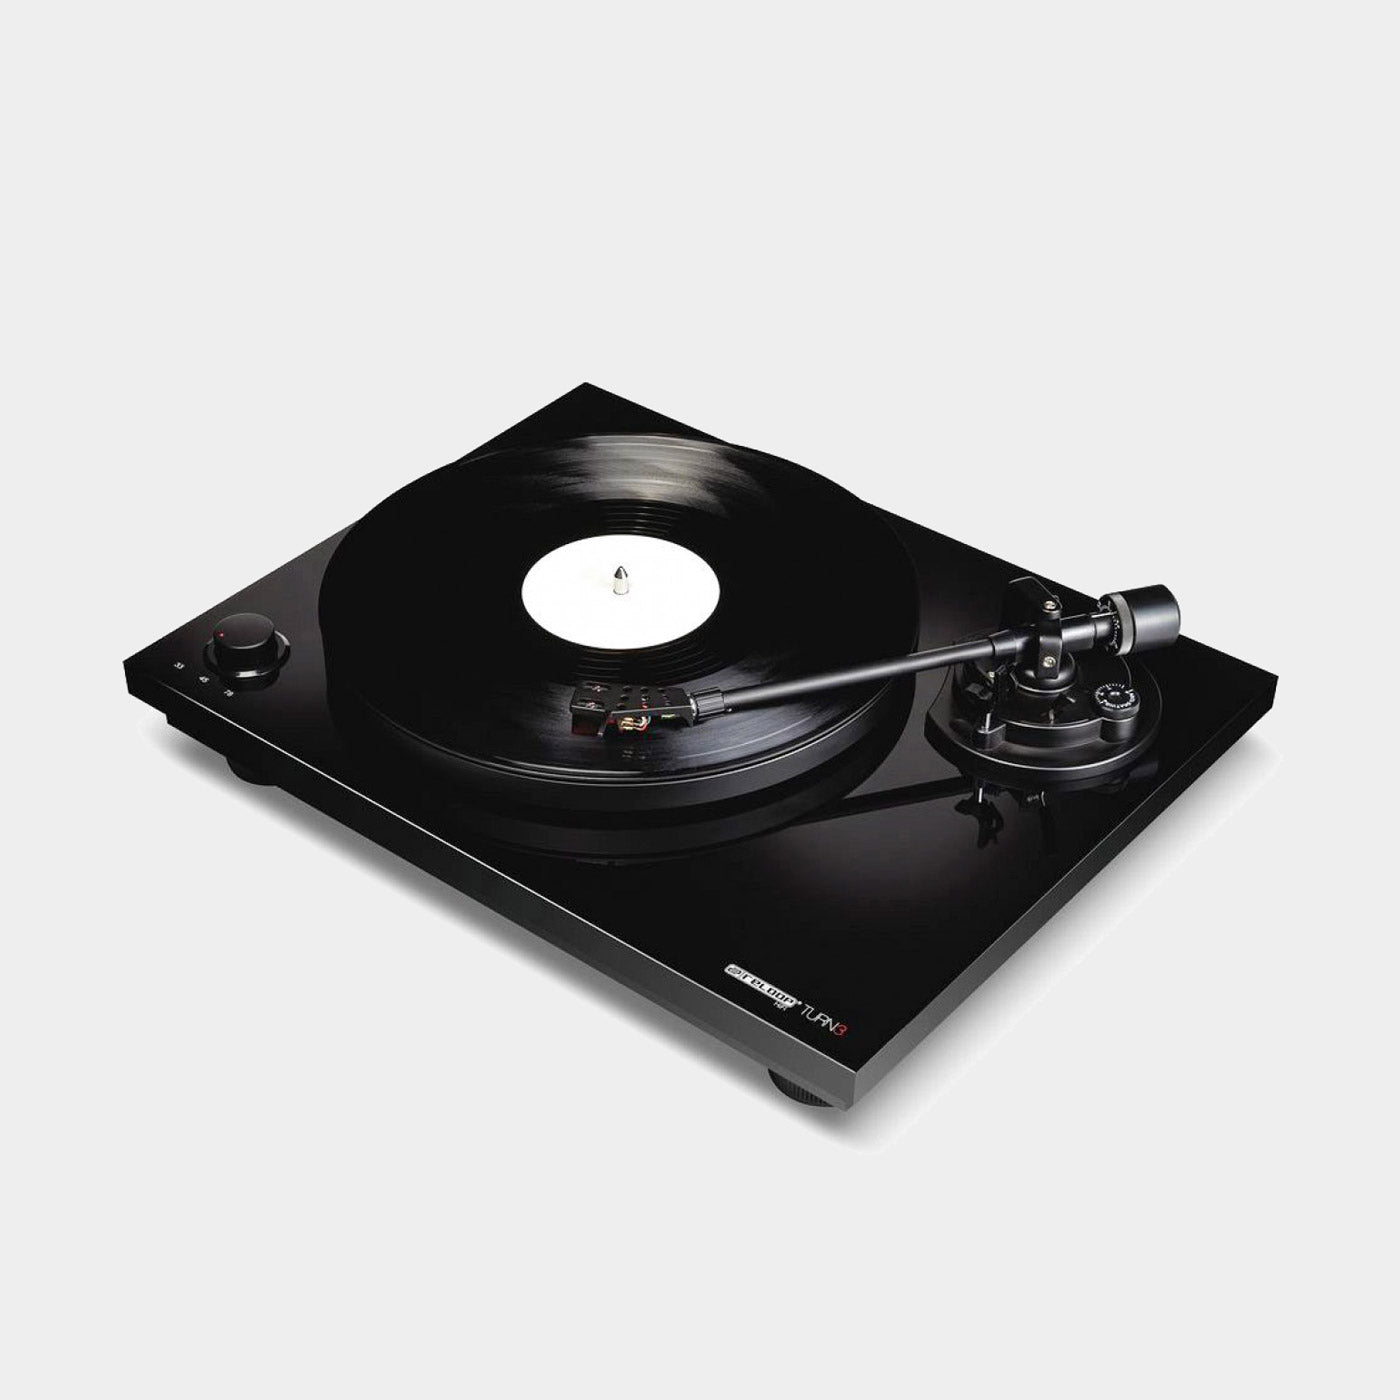 beautiful black record player by reloop